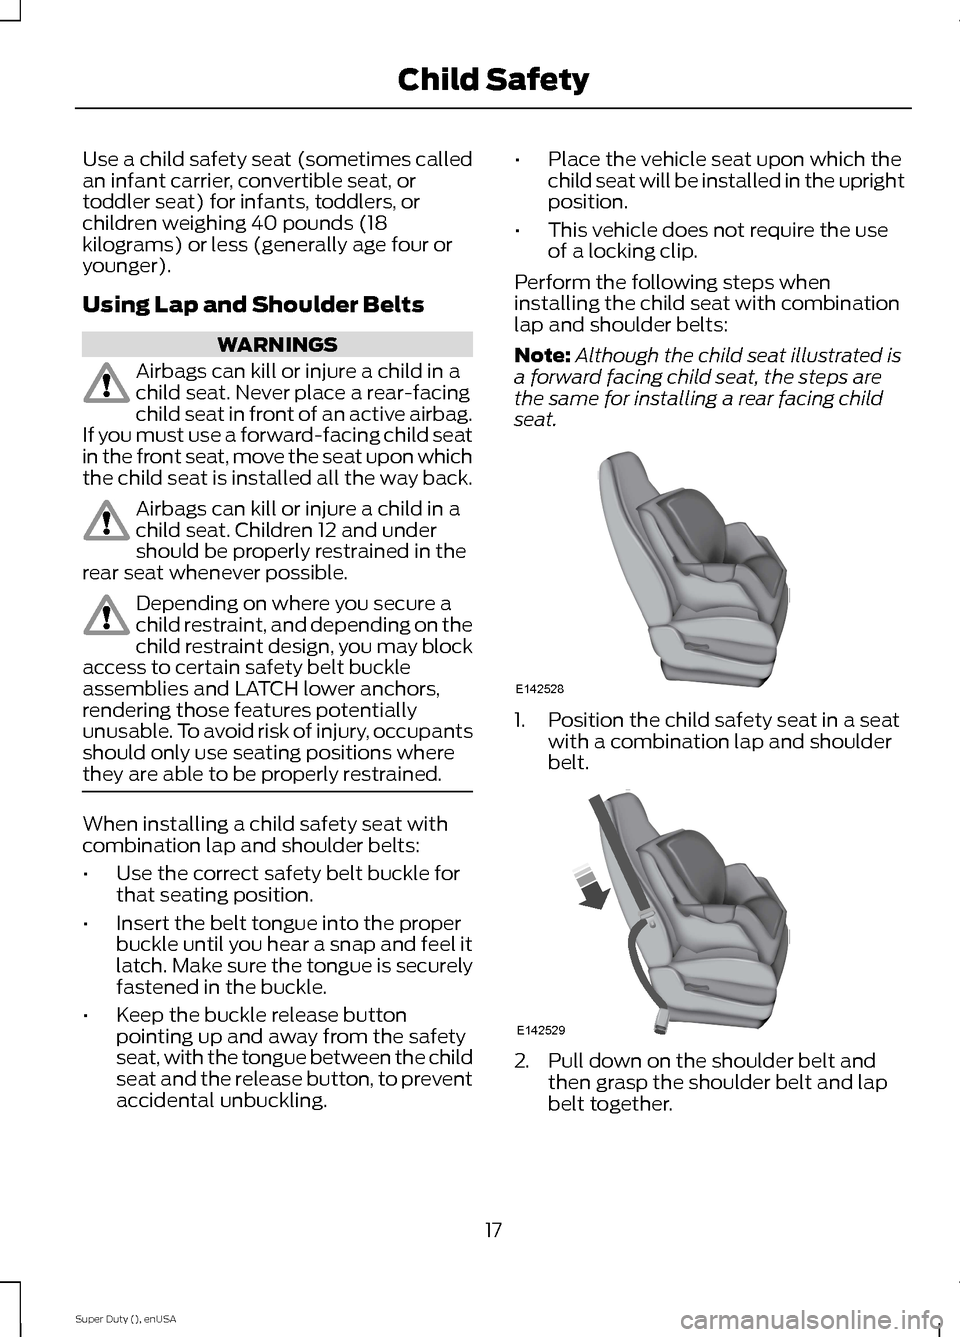 FORD SUPER DUTY 2015 3.G Owners Manual Use a child safety seat (sometimes calledan infant carrier, convertible seat, ortoddler seat) for infants, toddlers, orchildren weighing 40 pounds (18kilograms) or less (generally age four oryounger).